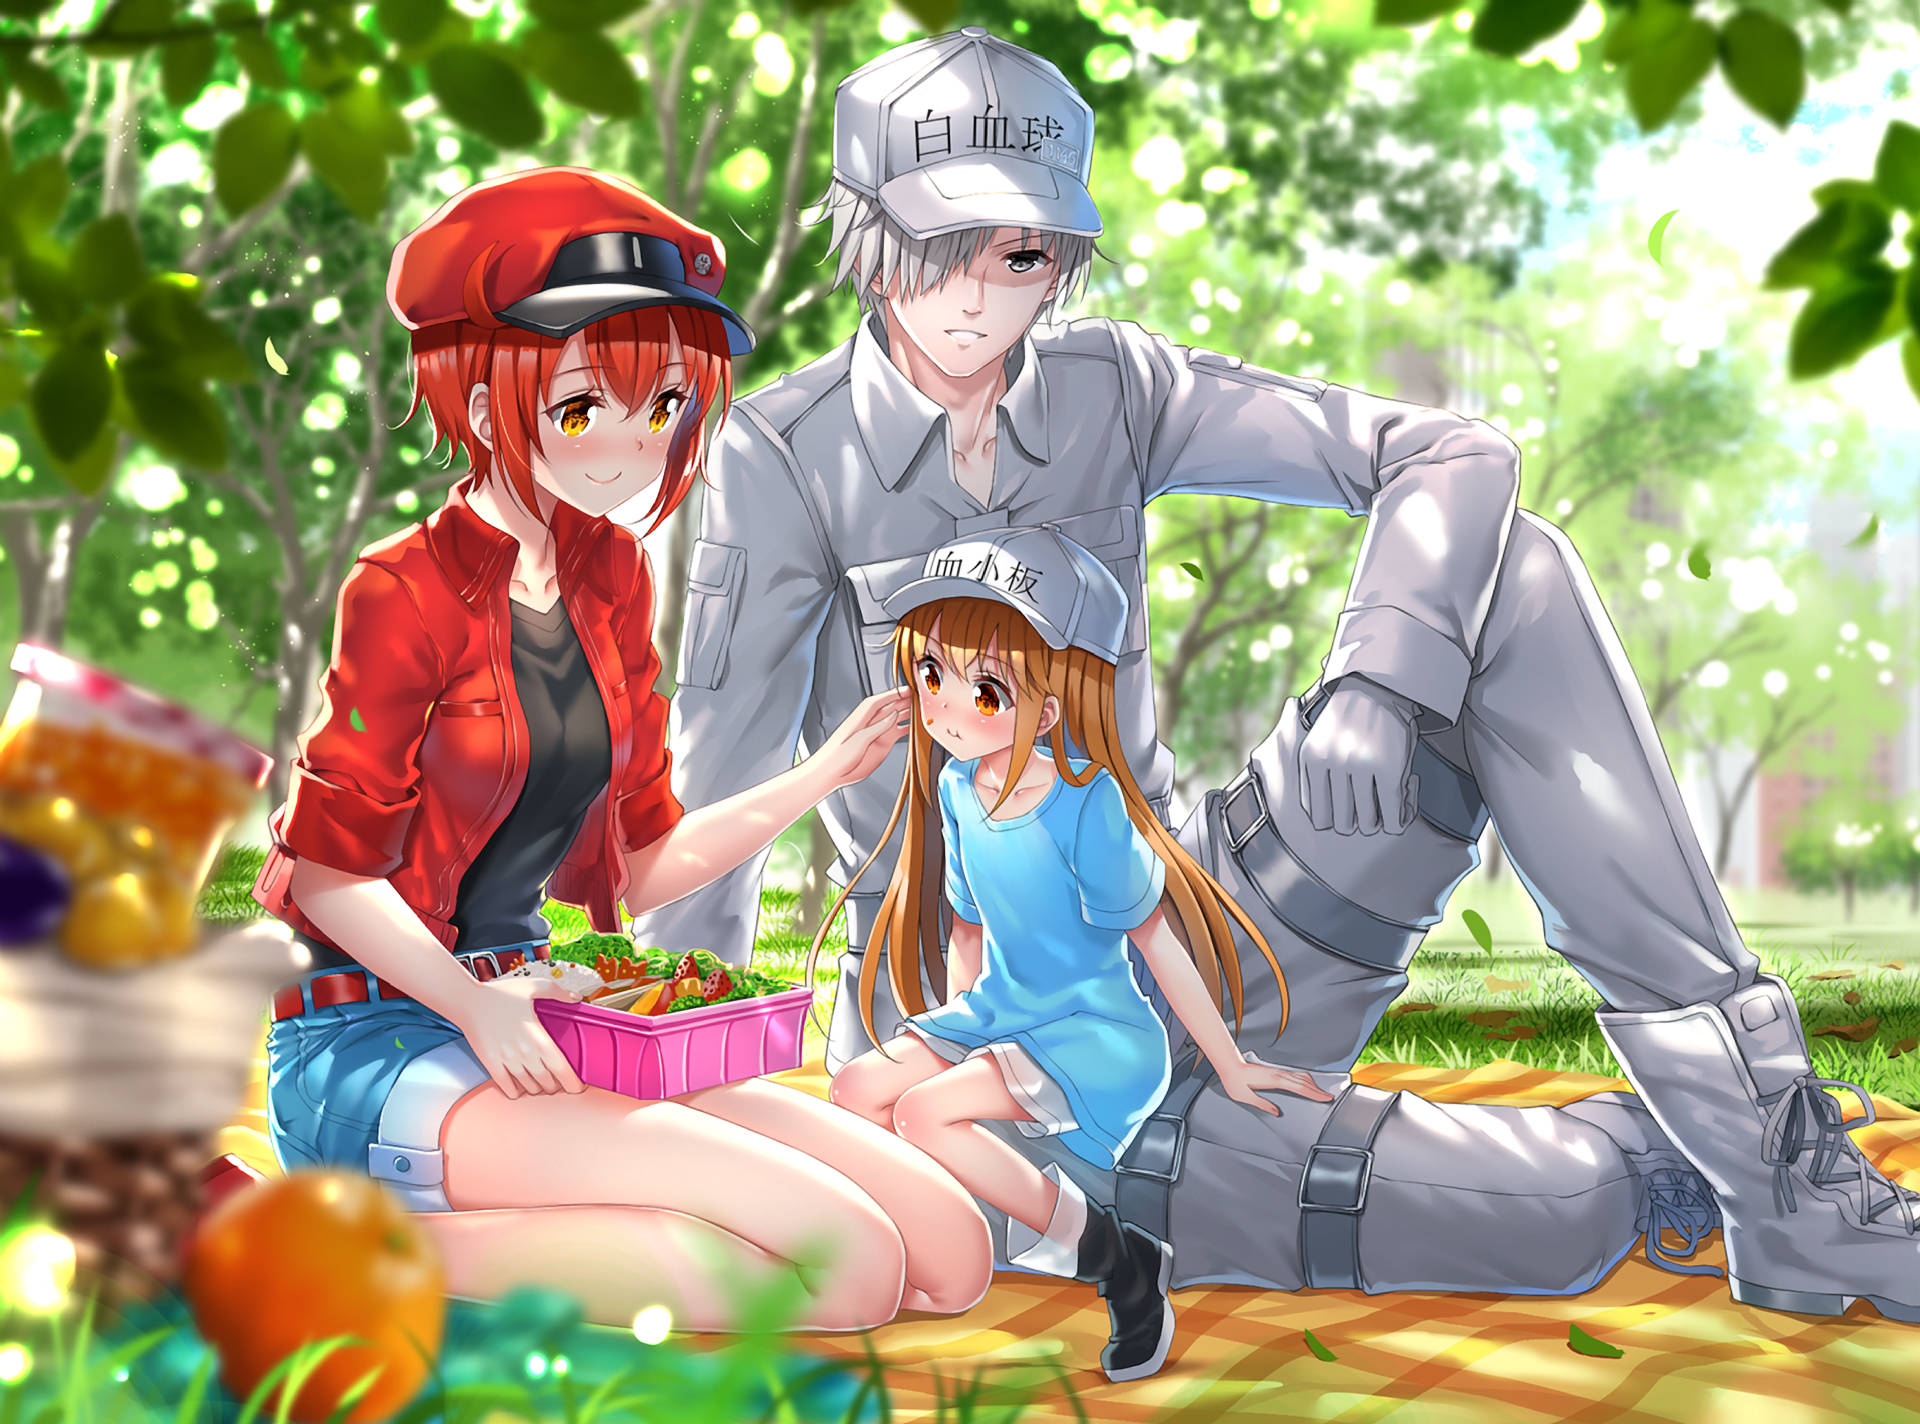 Cells At Work On Picnic Fanart Background